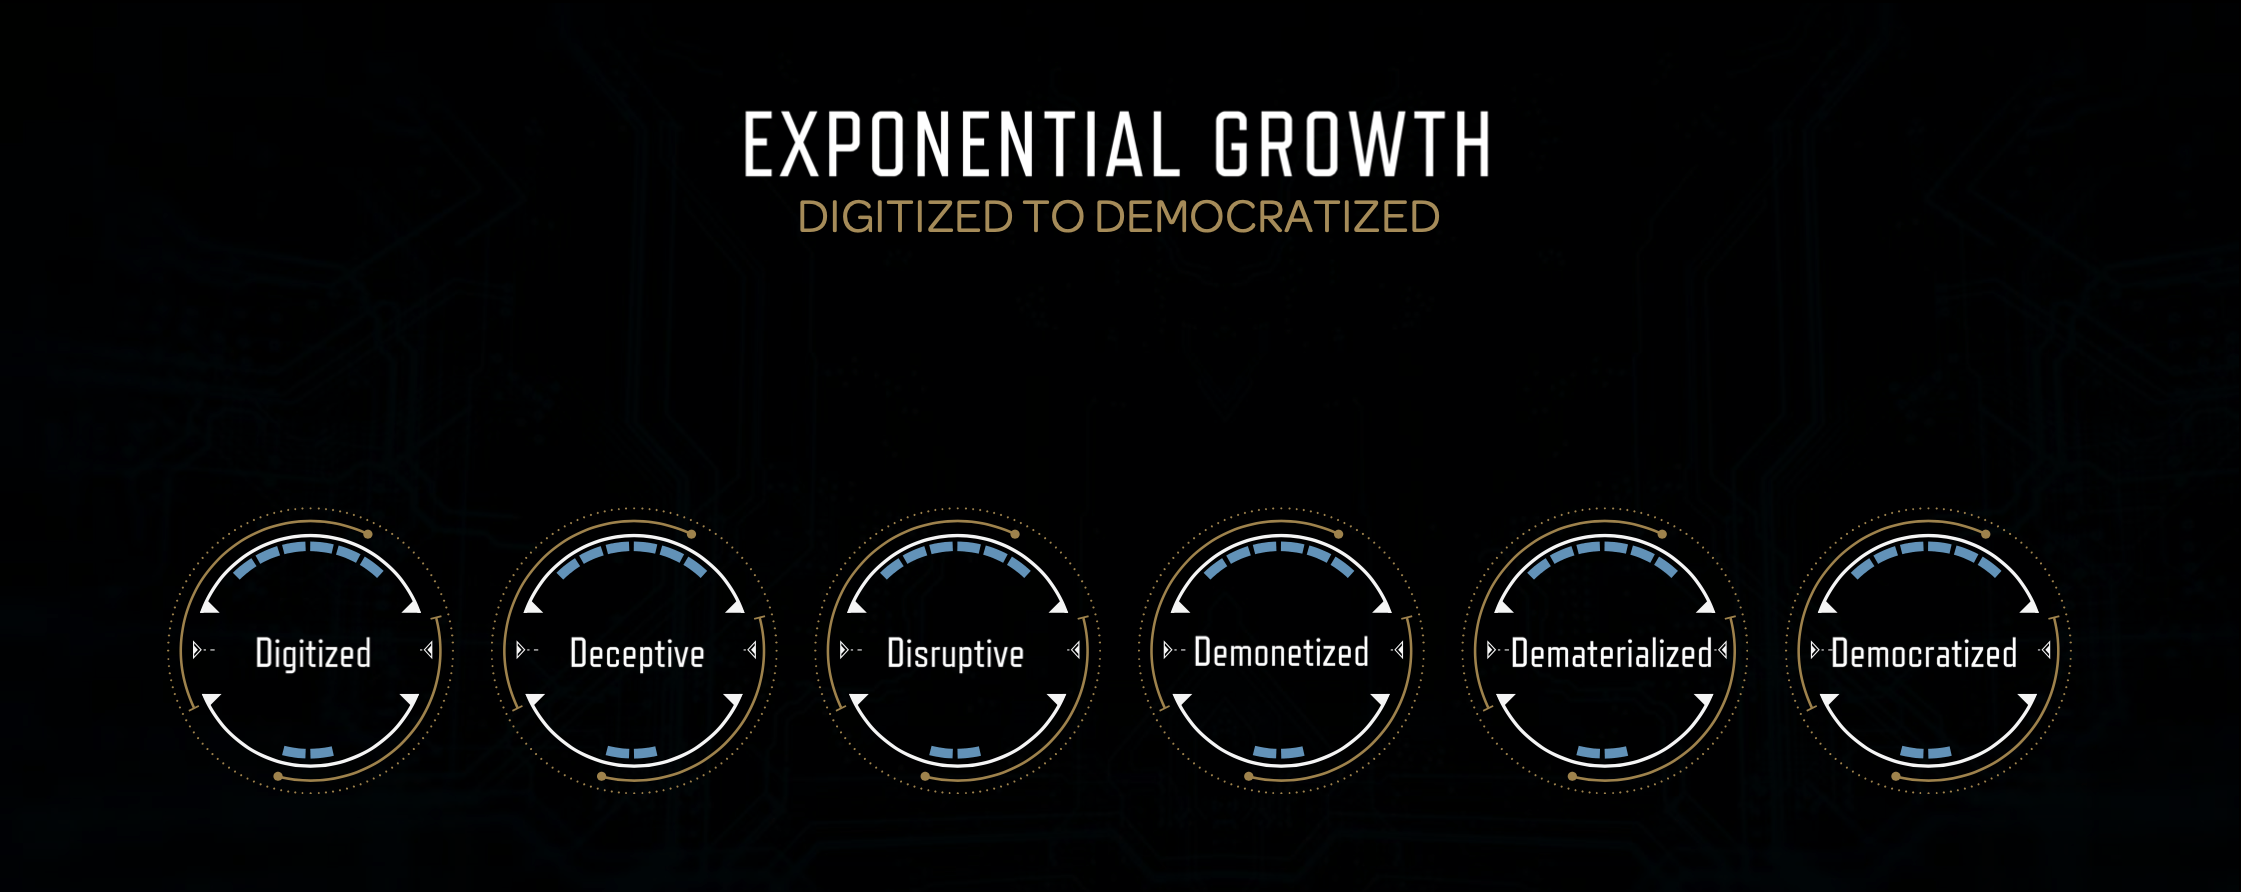 Why you need to start thinking exponentially